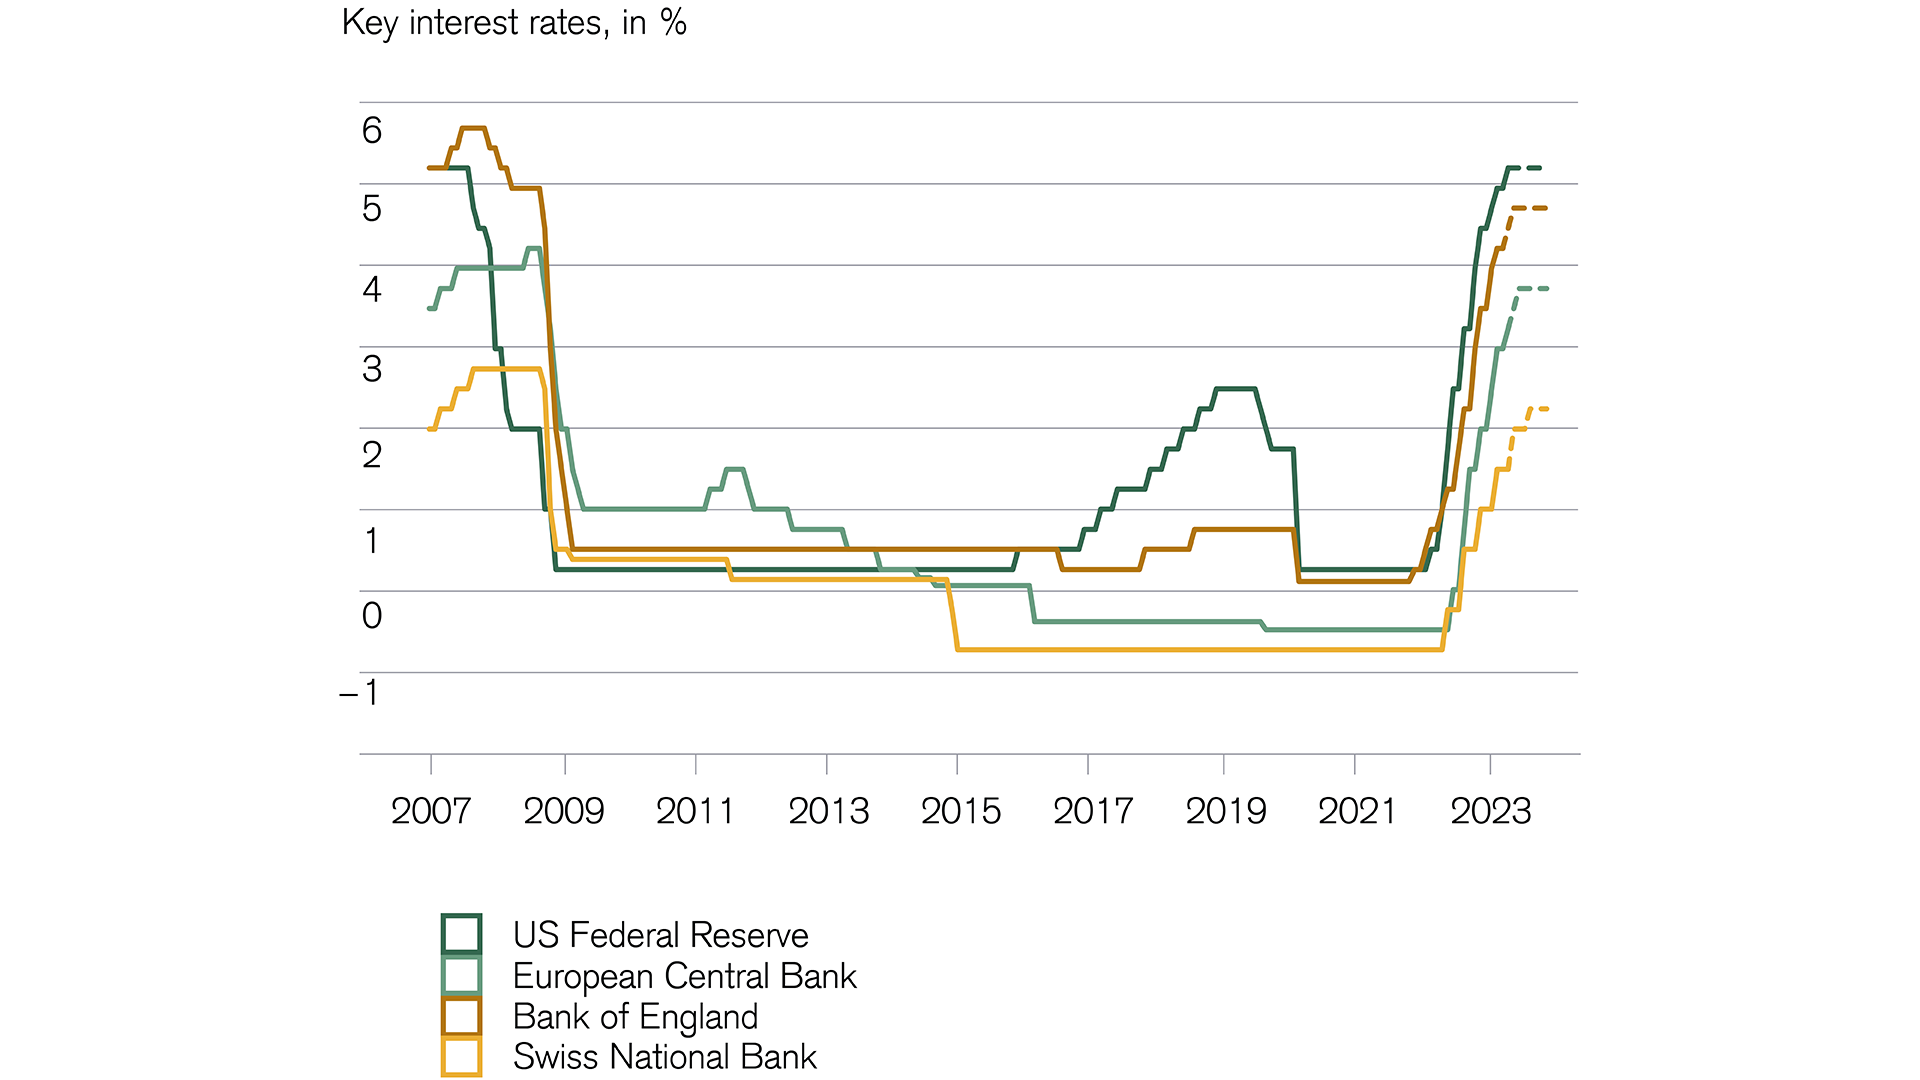 Interest rates and bonds: Key interest rates projected to remain high